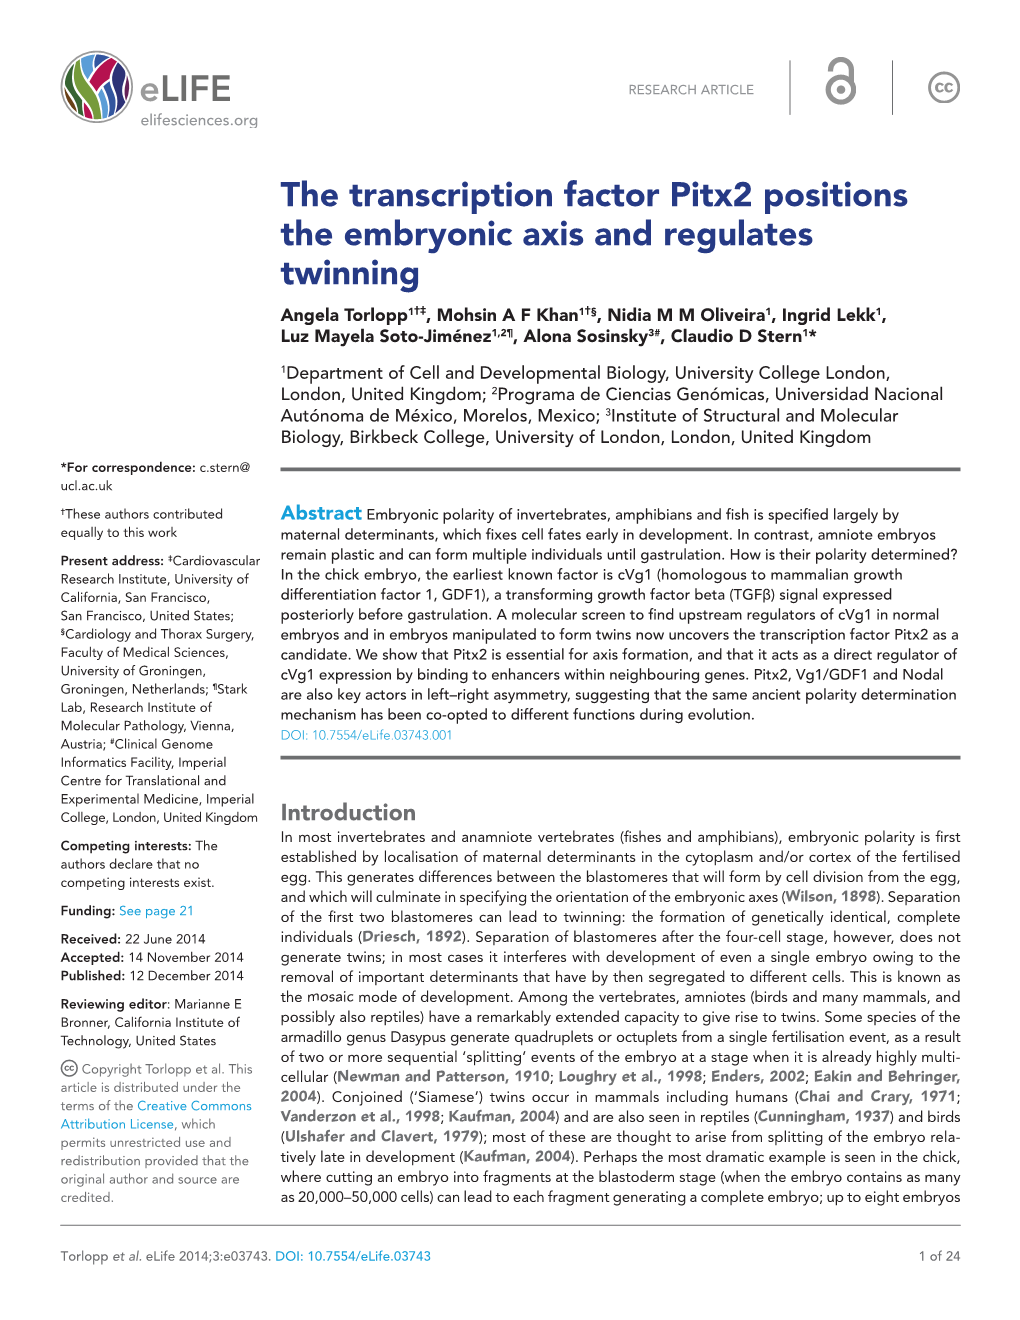 The Transcription Factor Pitx2 Positions the Embryonic Axis and Regulates